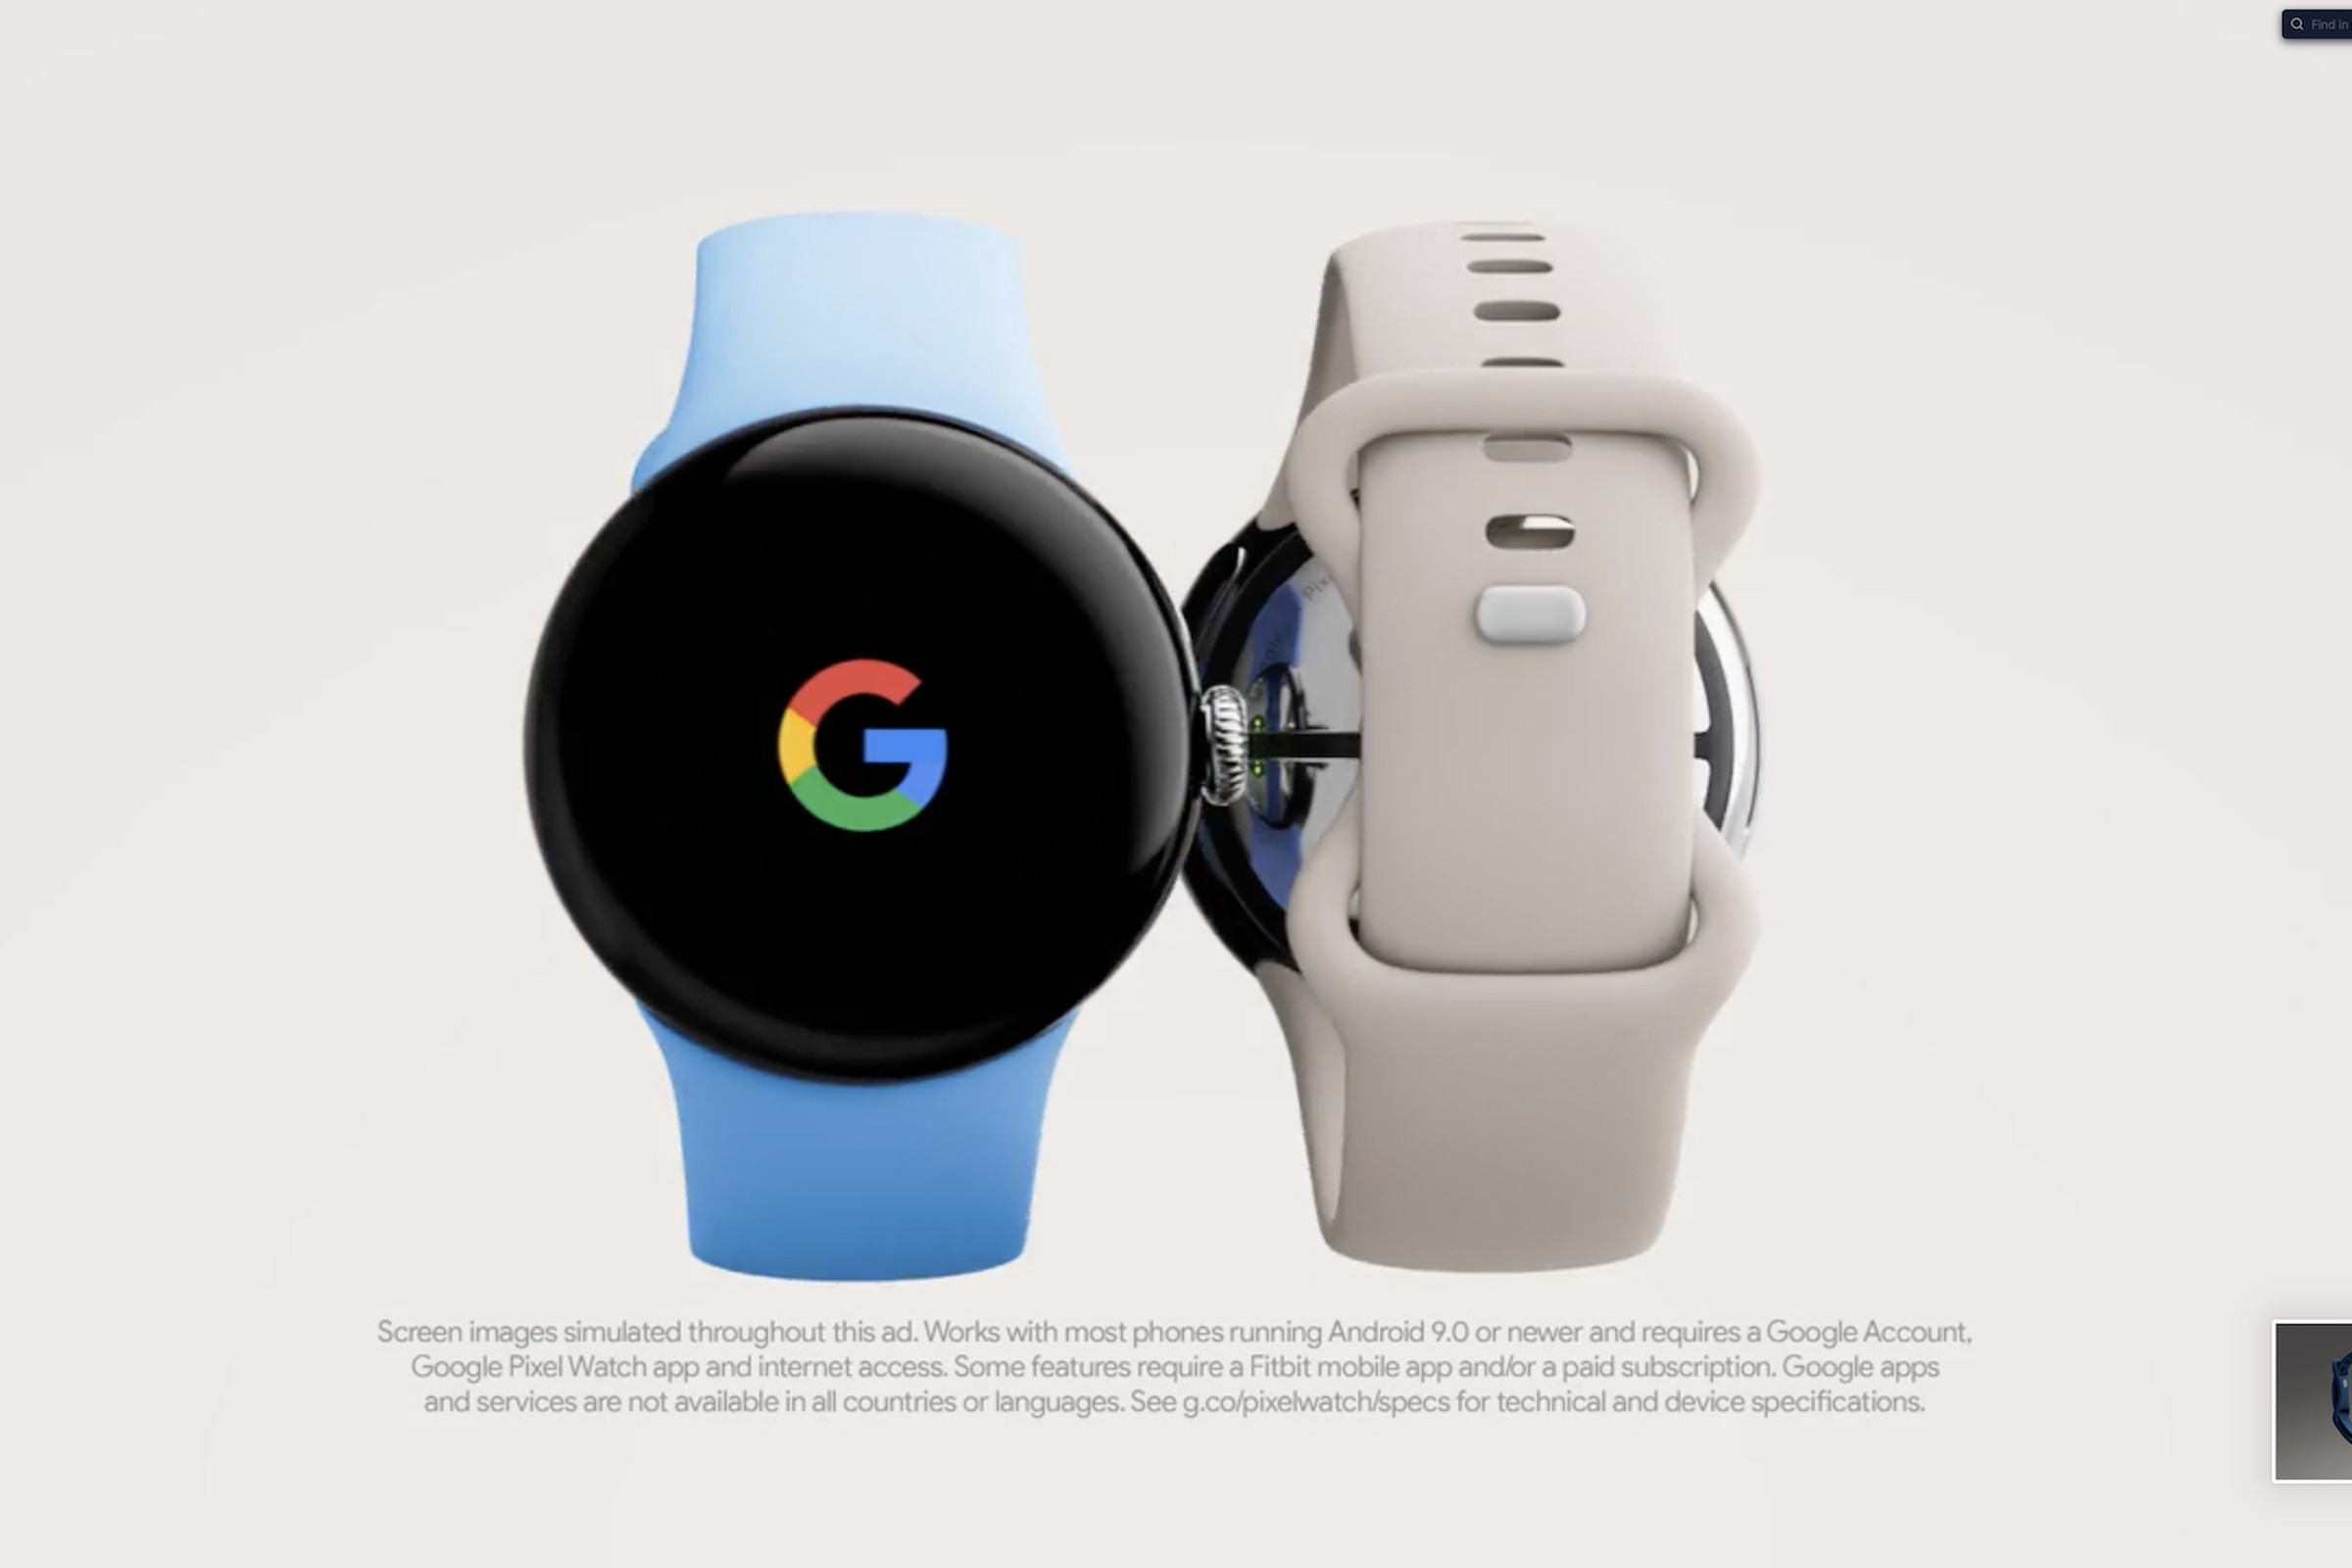 A screenshot of the Pixel Watch 2 from Google’s leaked promotional video.